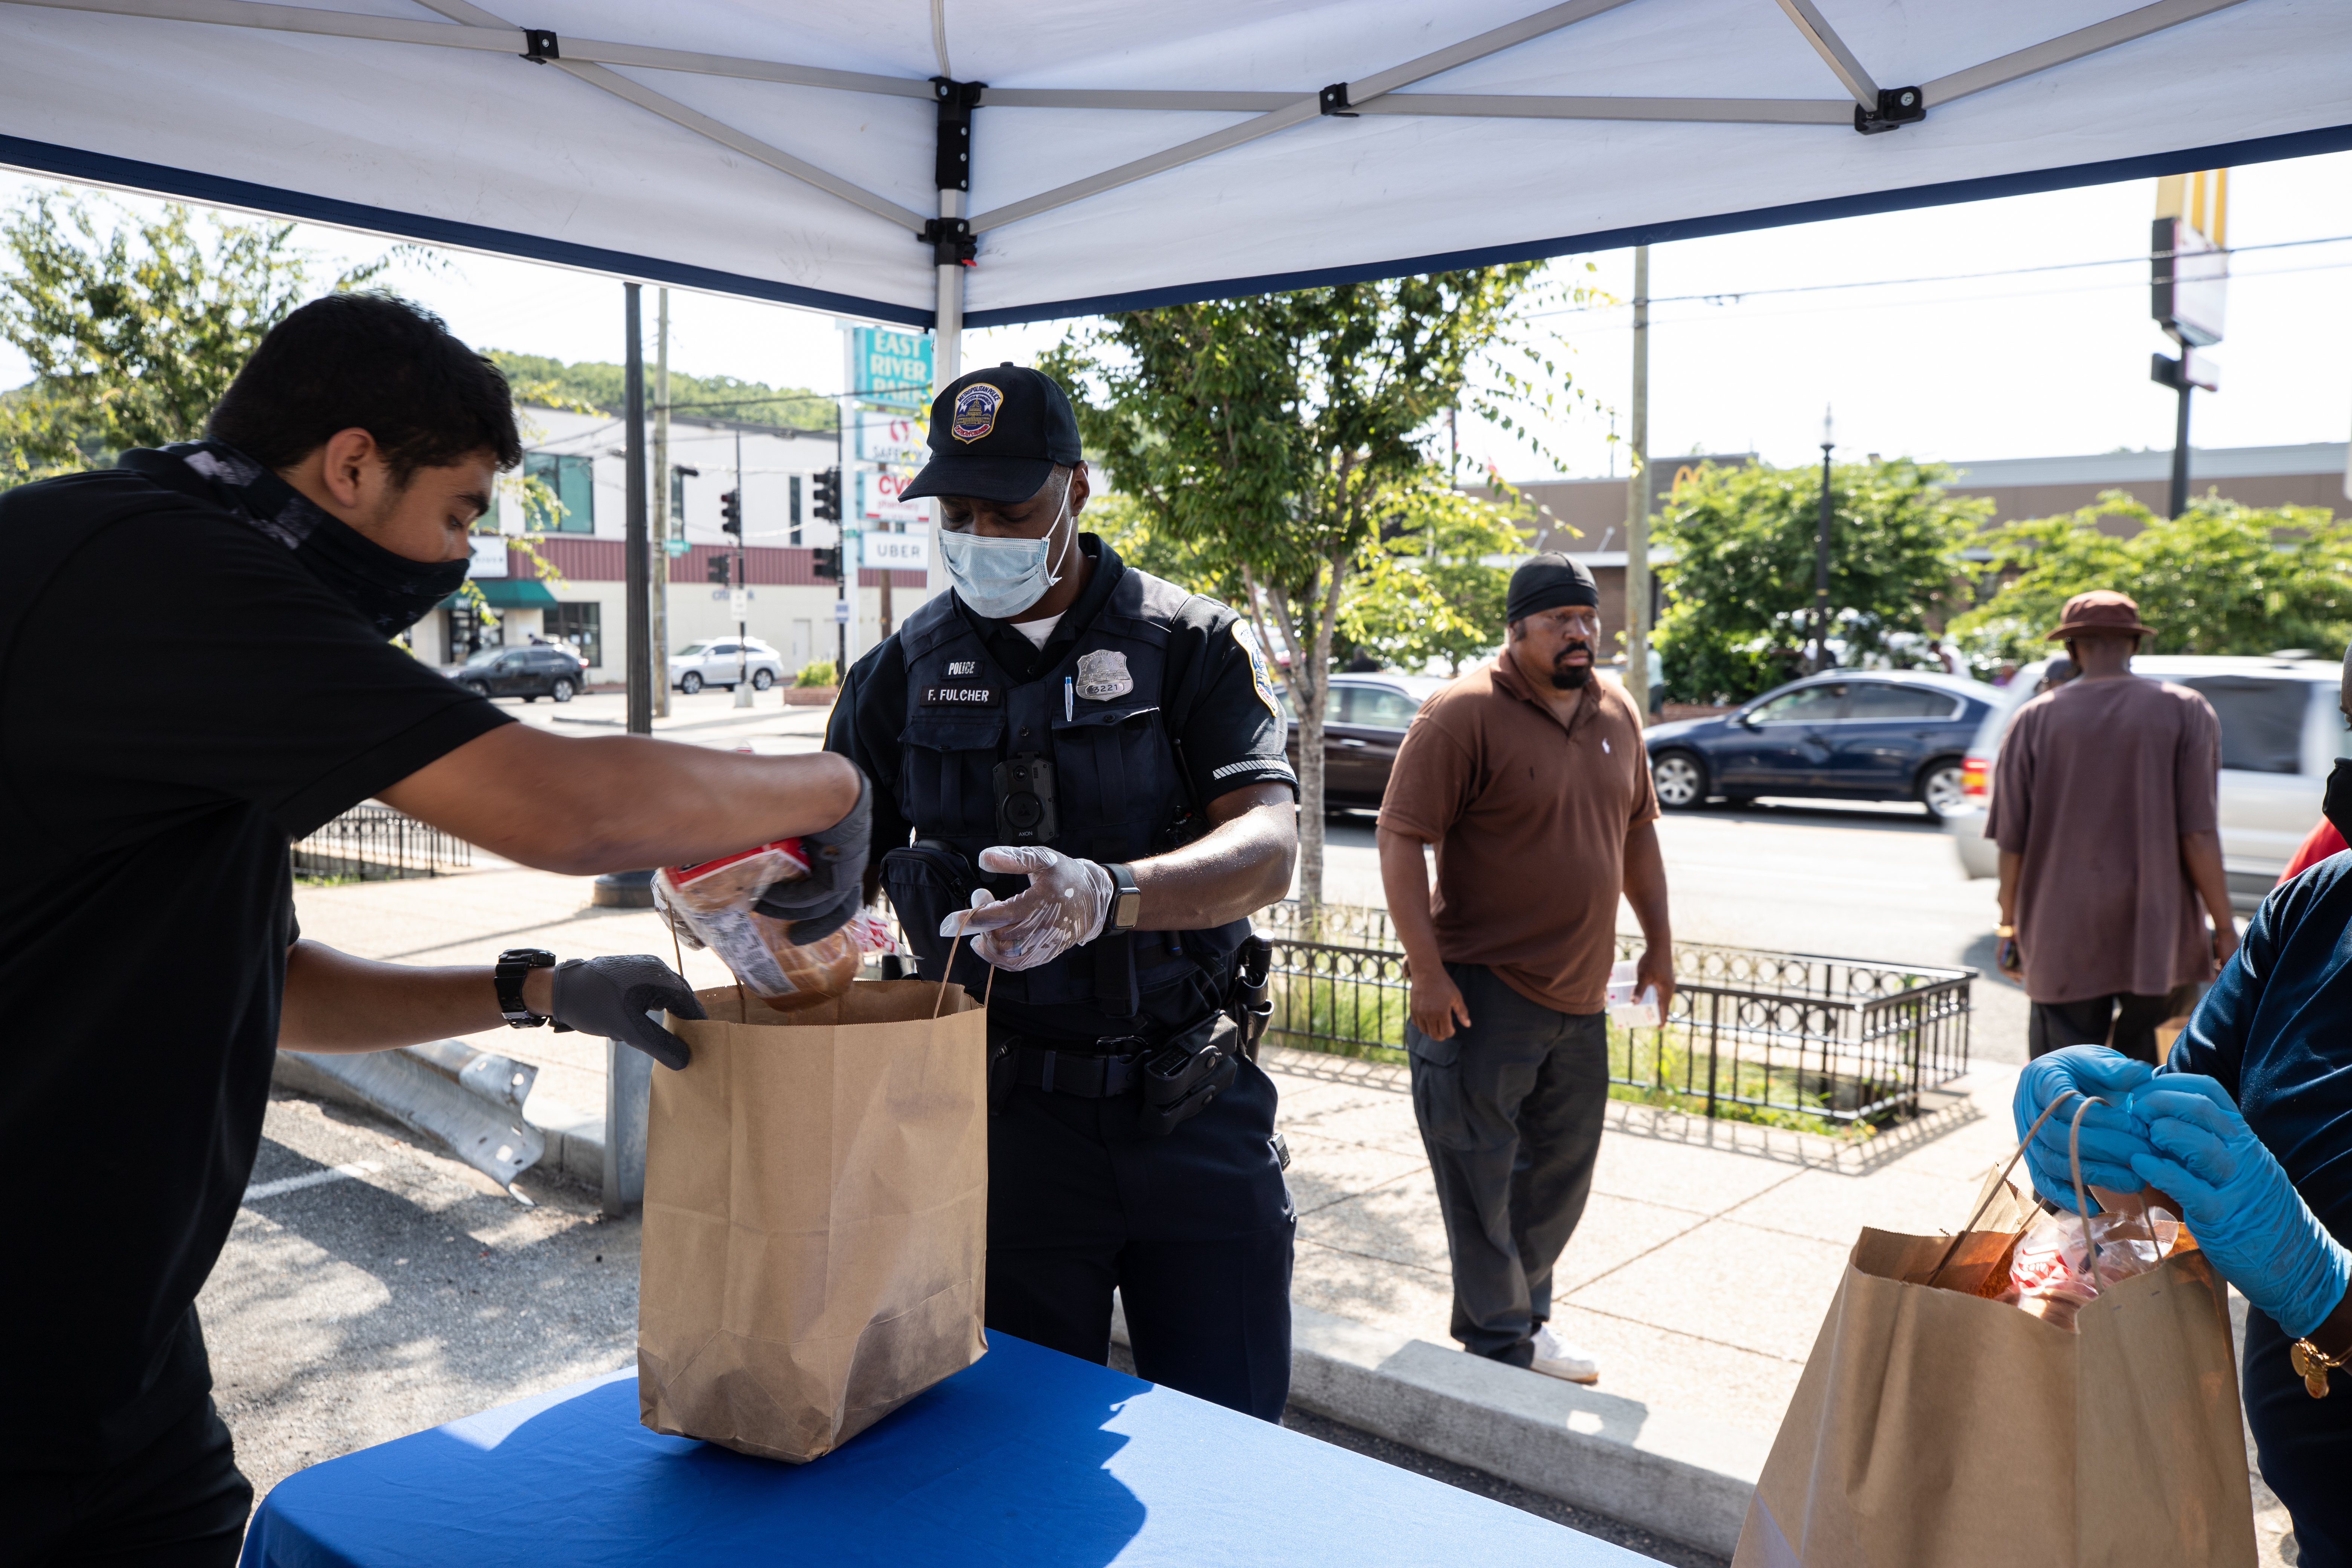 D.C. Metro Police Officers pass out grocery bags to people in D.C.'s Sixth District. (Photo: Kaylee C. Greenlee - Daily Caller News Foundation)